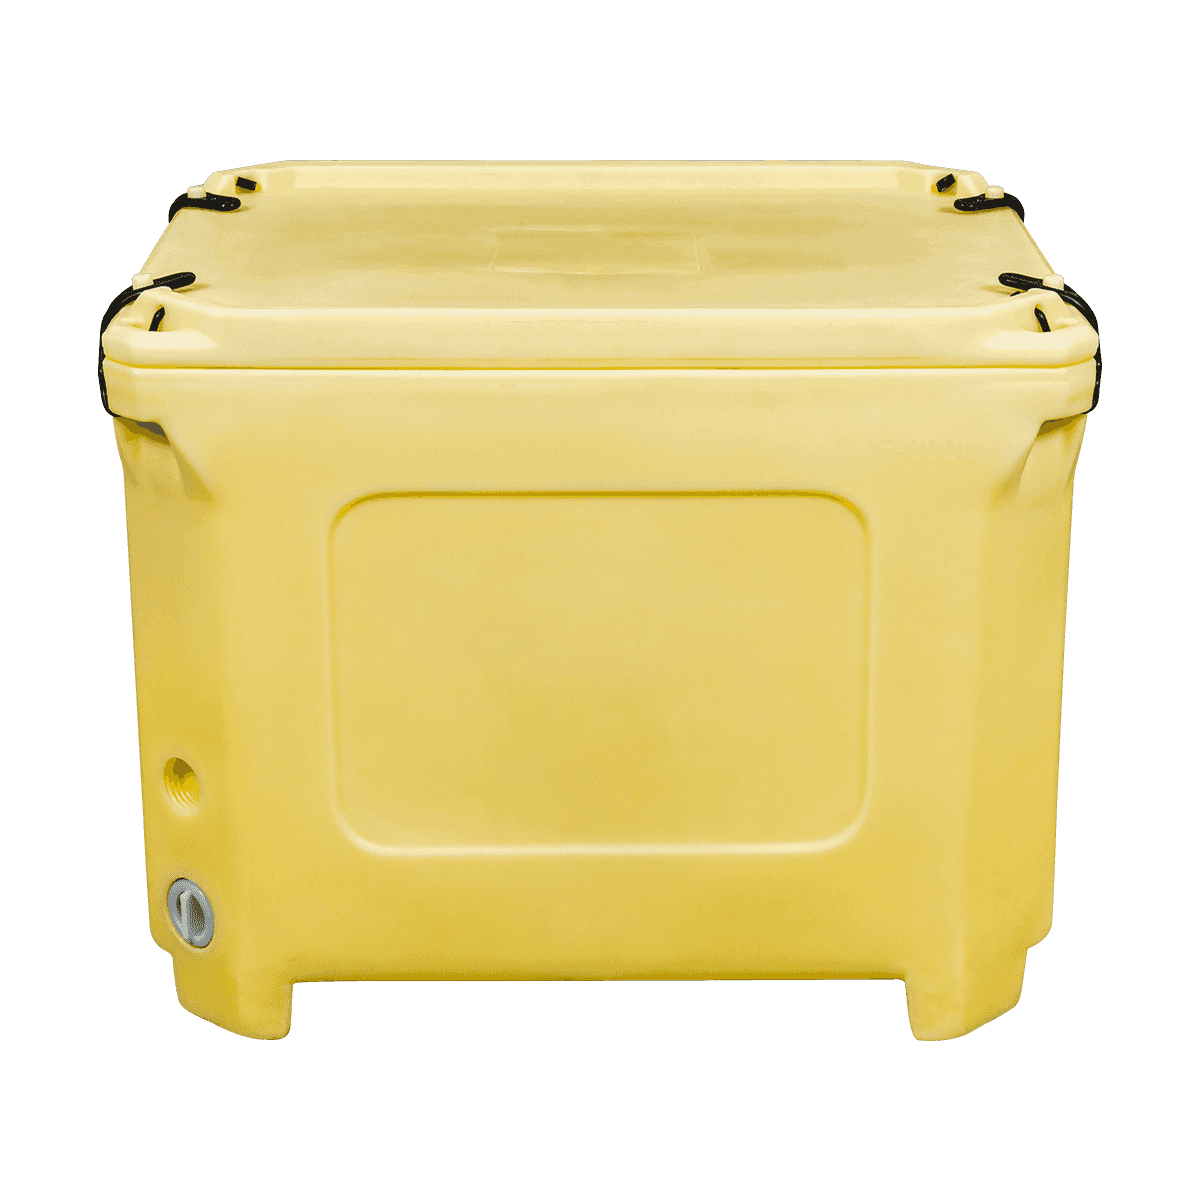 F-300L Insulated Seafood Industrial Use Plastic Containers